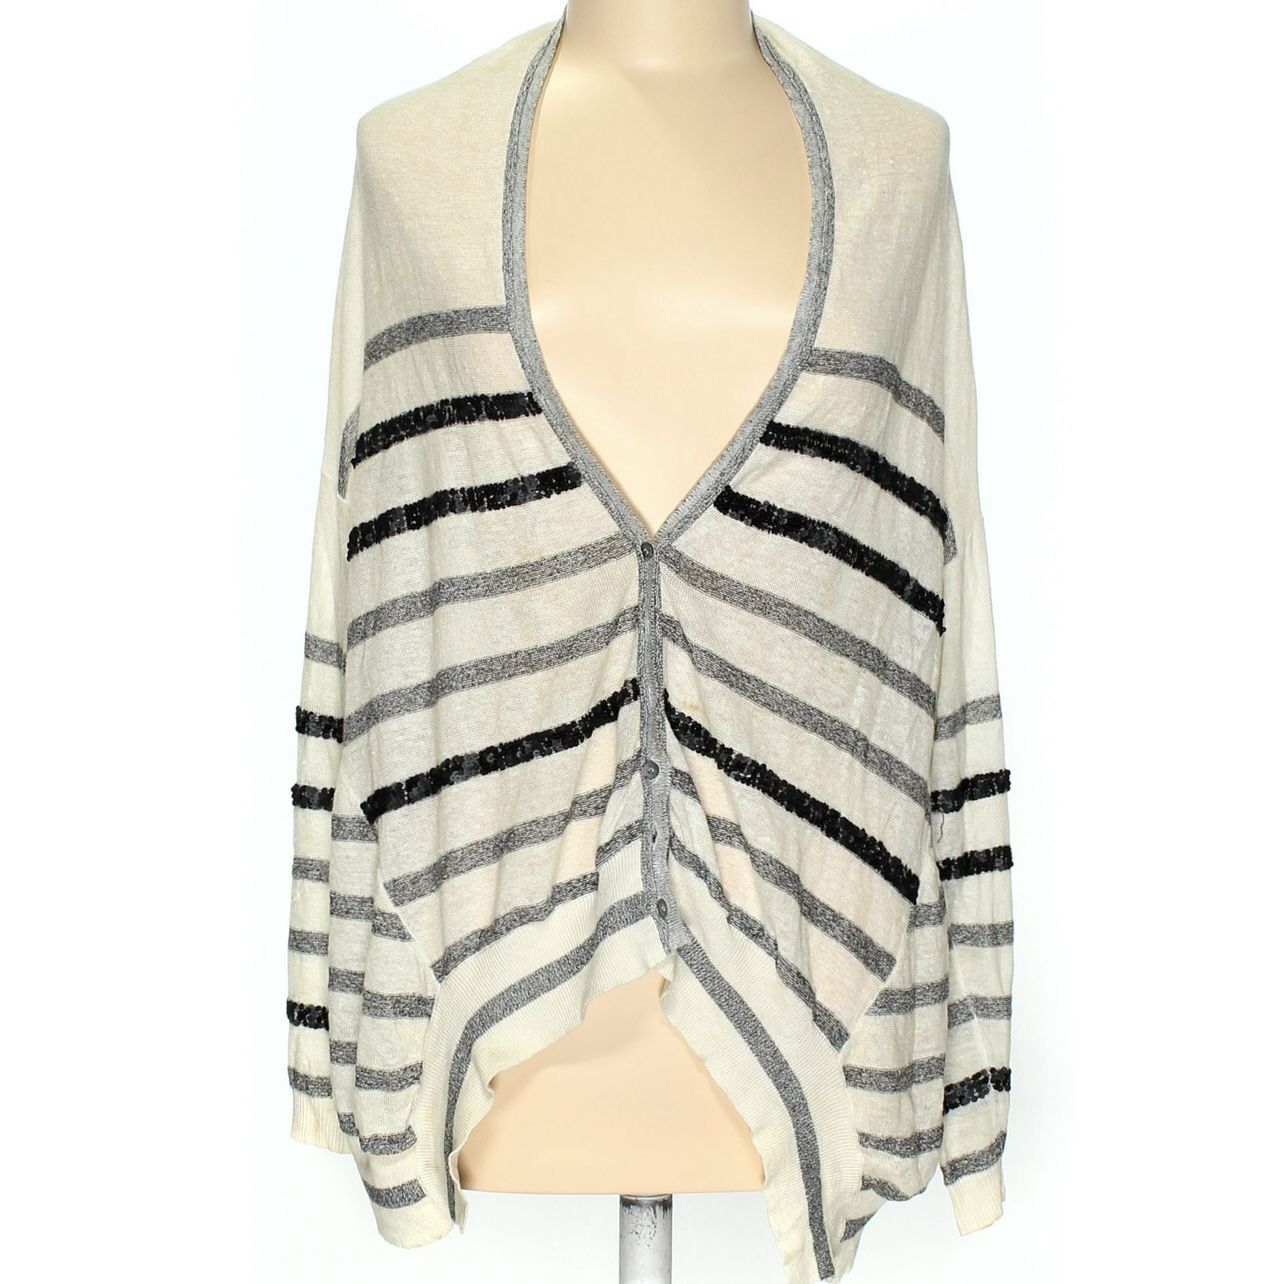 Anthropologie x Line  Sequin Striped Linen Cocoon Cardigan, Size S 